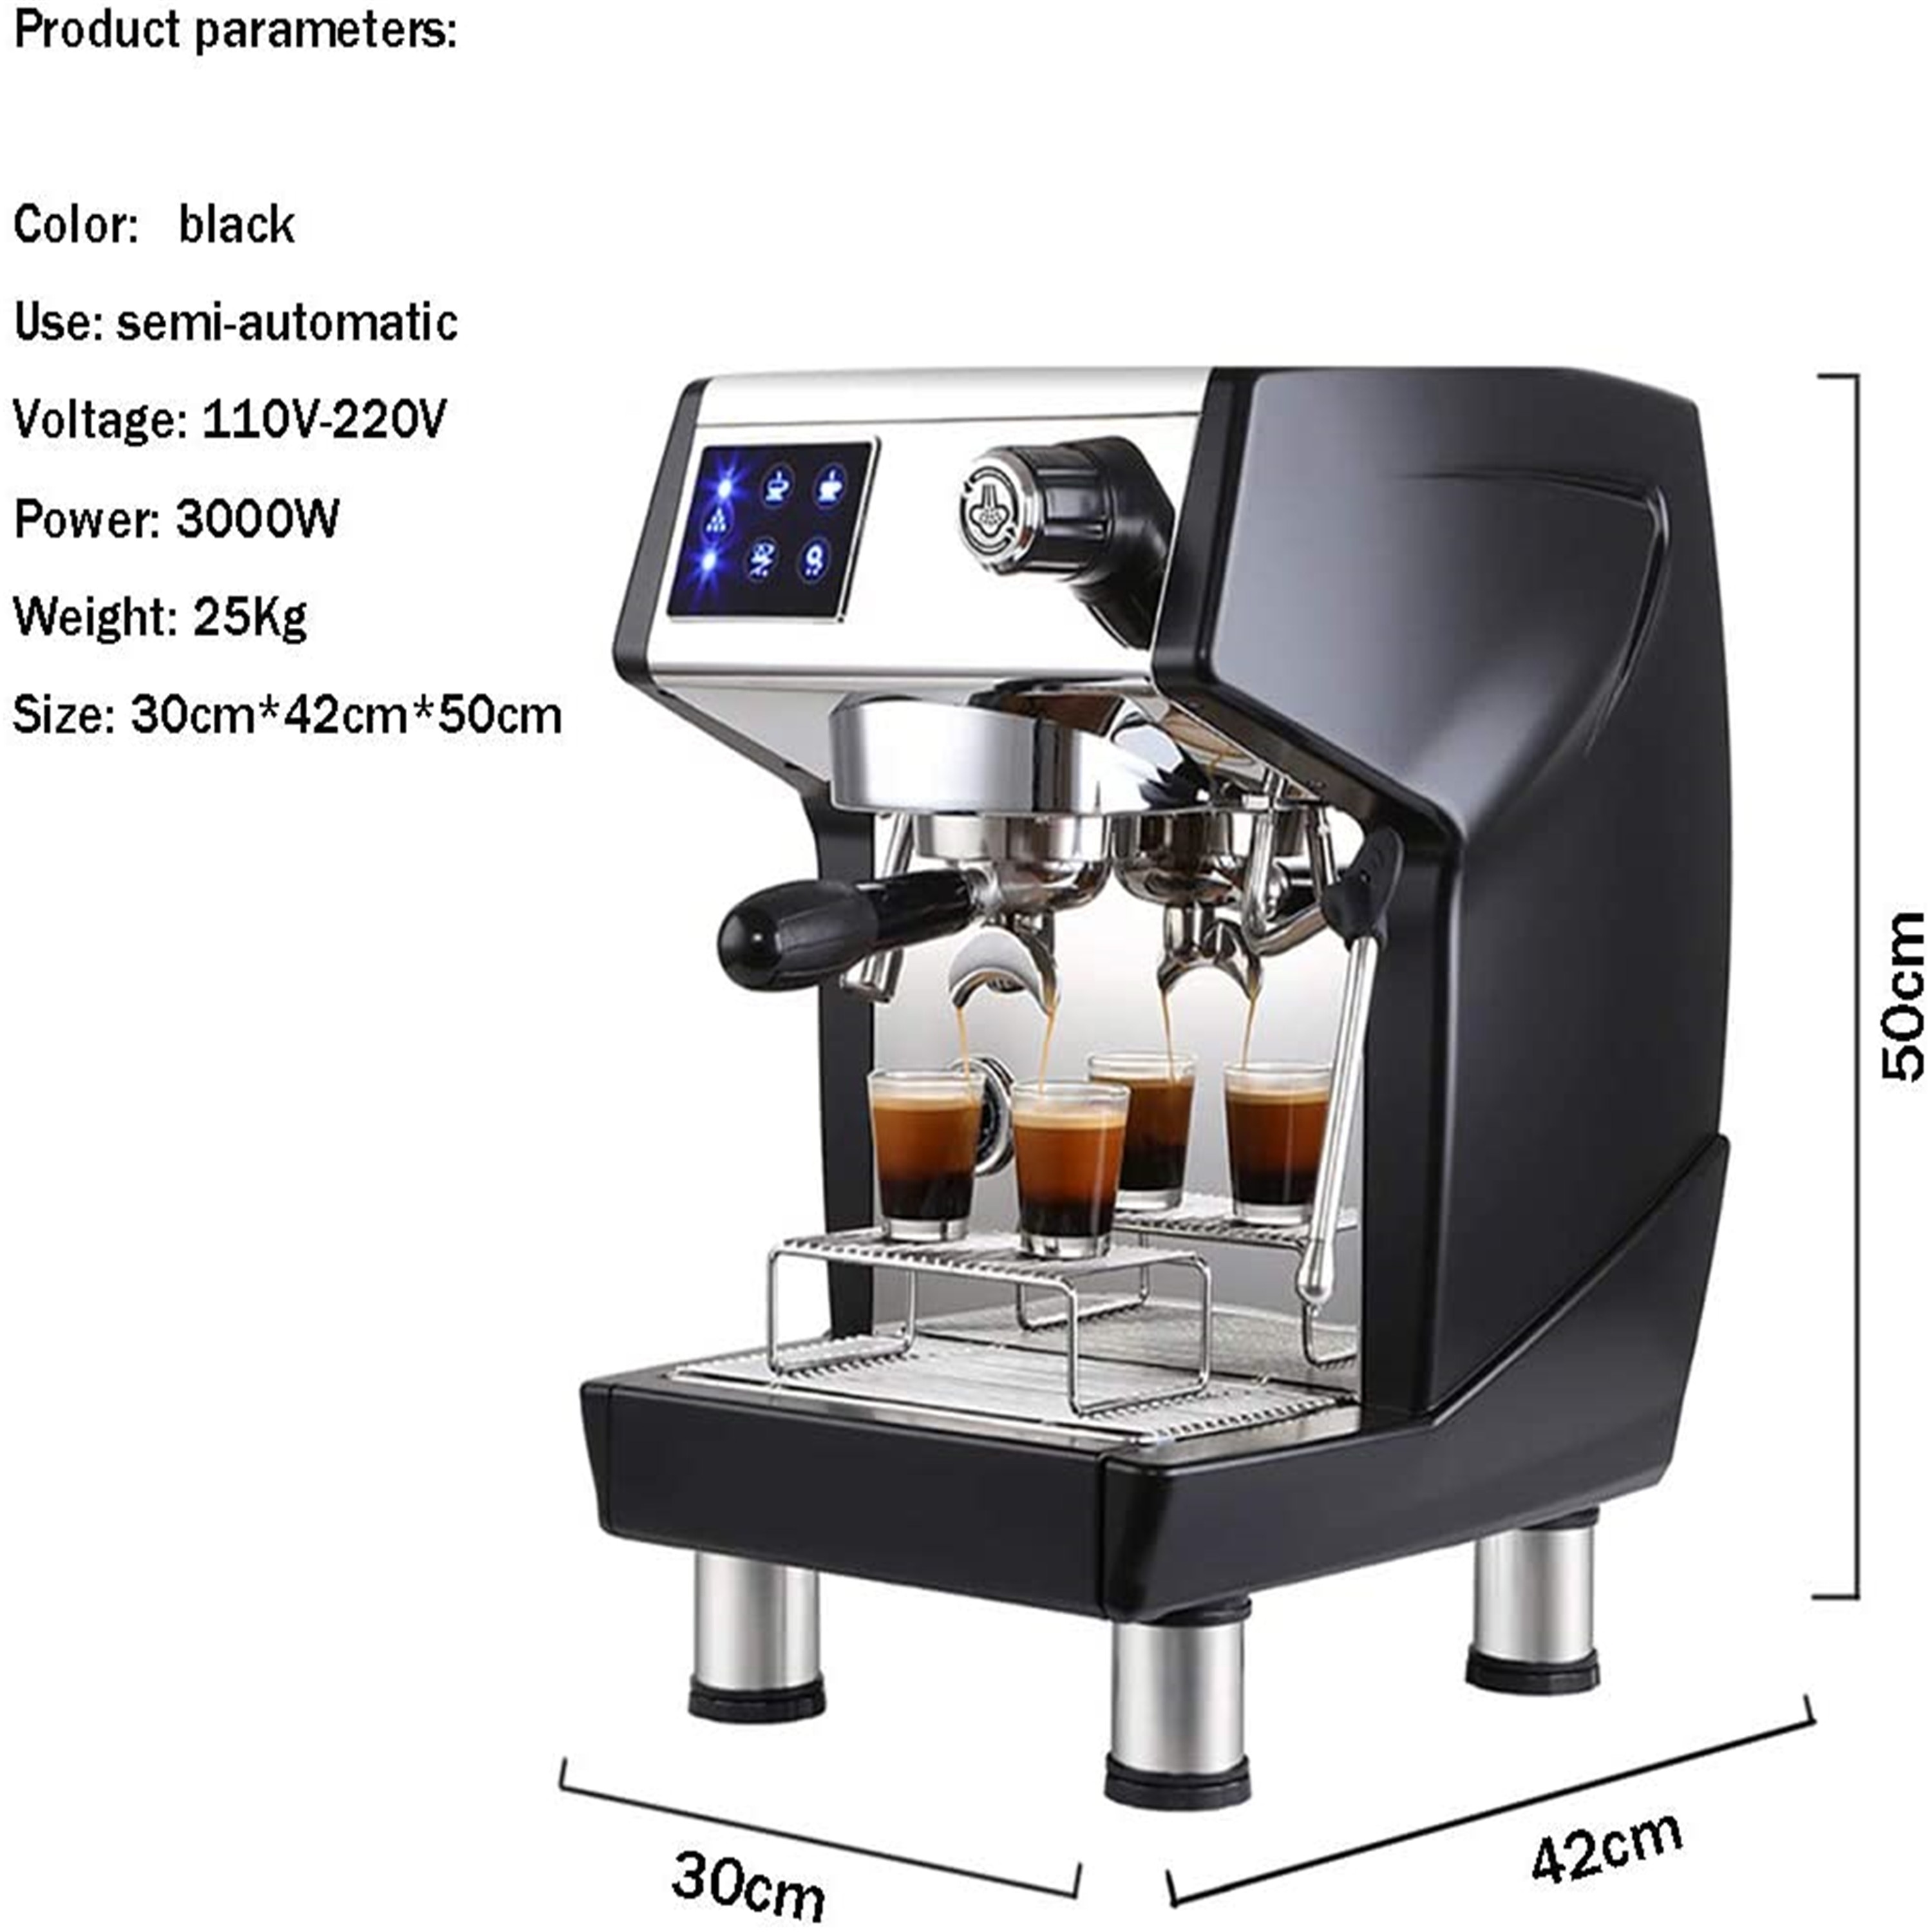 https://ak1.ostkcdn.com/images/products/is/images/direct/015dccde644ffc178a4167660b7ec0442313bc64/Luxury-Coffee-Machines-Fancy-Milk-Ball-Espresso-Maker-Button-Display-Screen-Cappuccino-Brewer.jpg